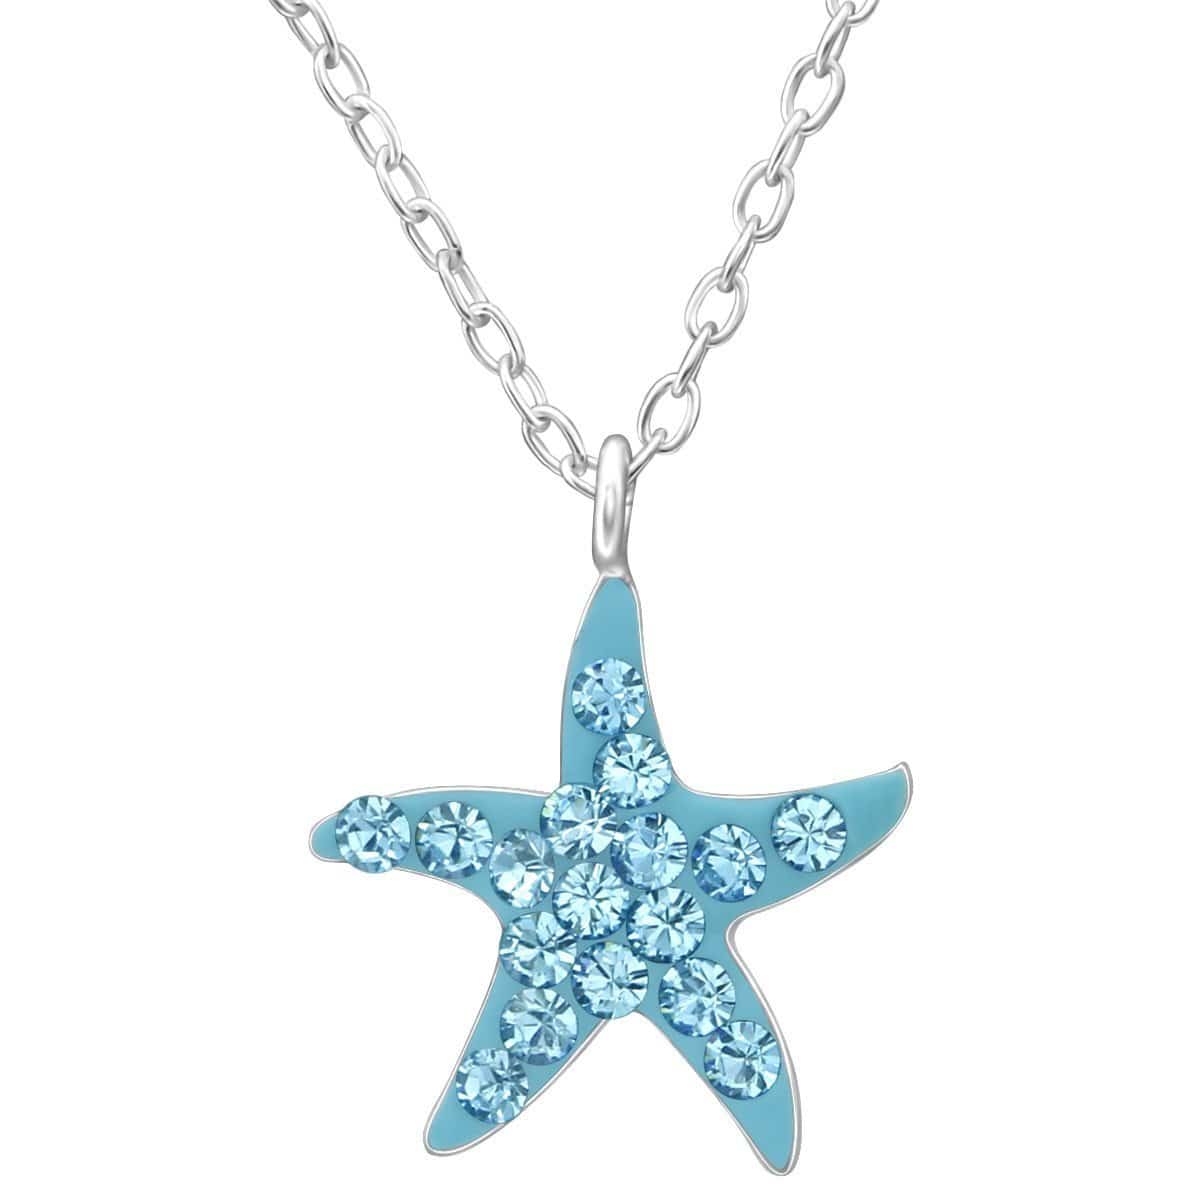 Kid's Sterling Silver Starfish Necklace Made With Swarovski Crystals